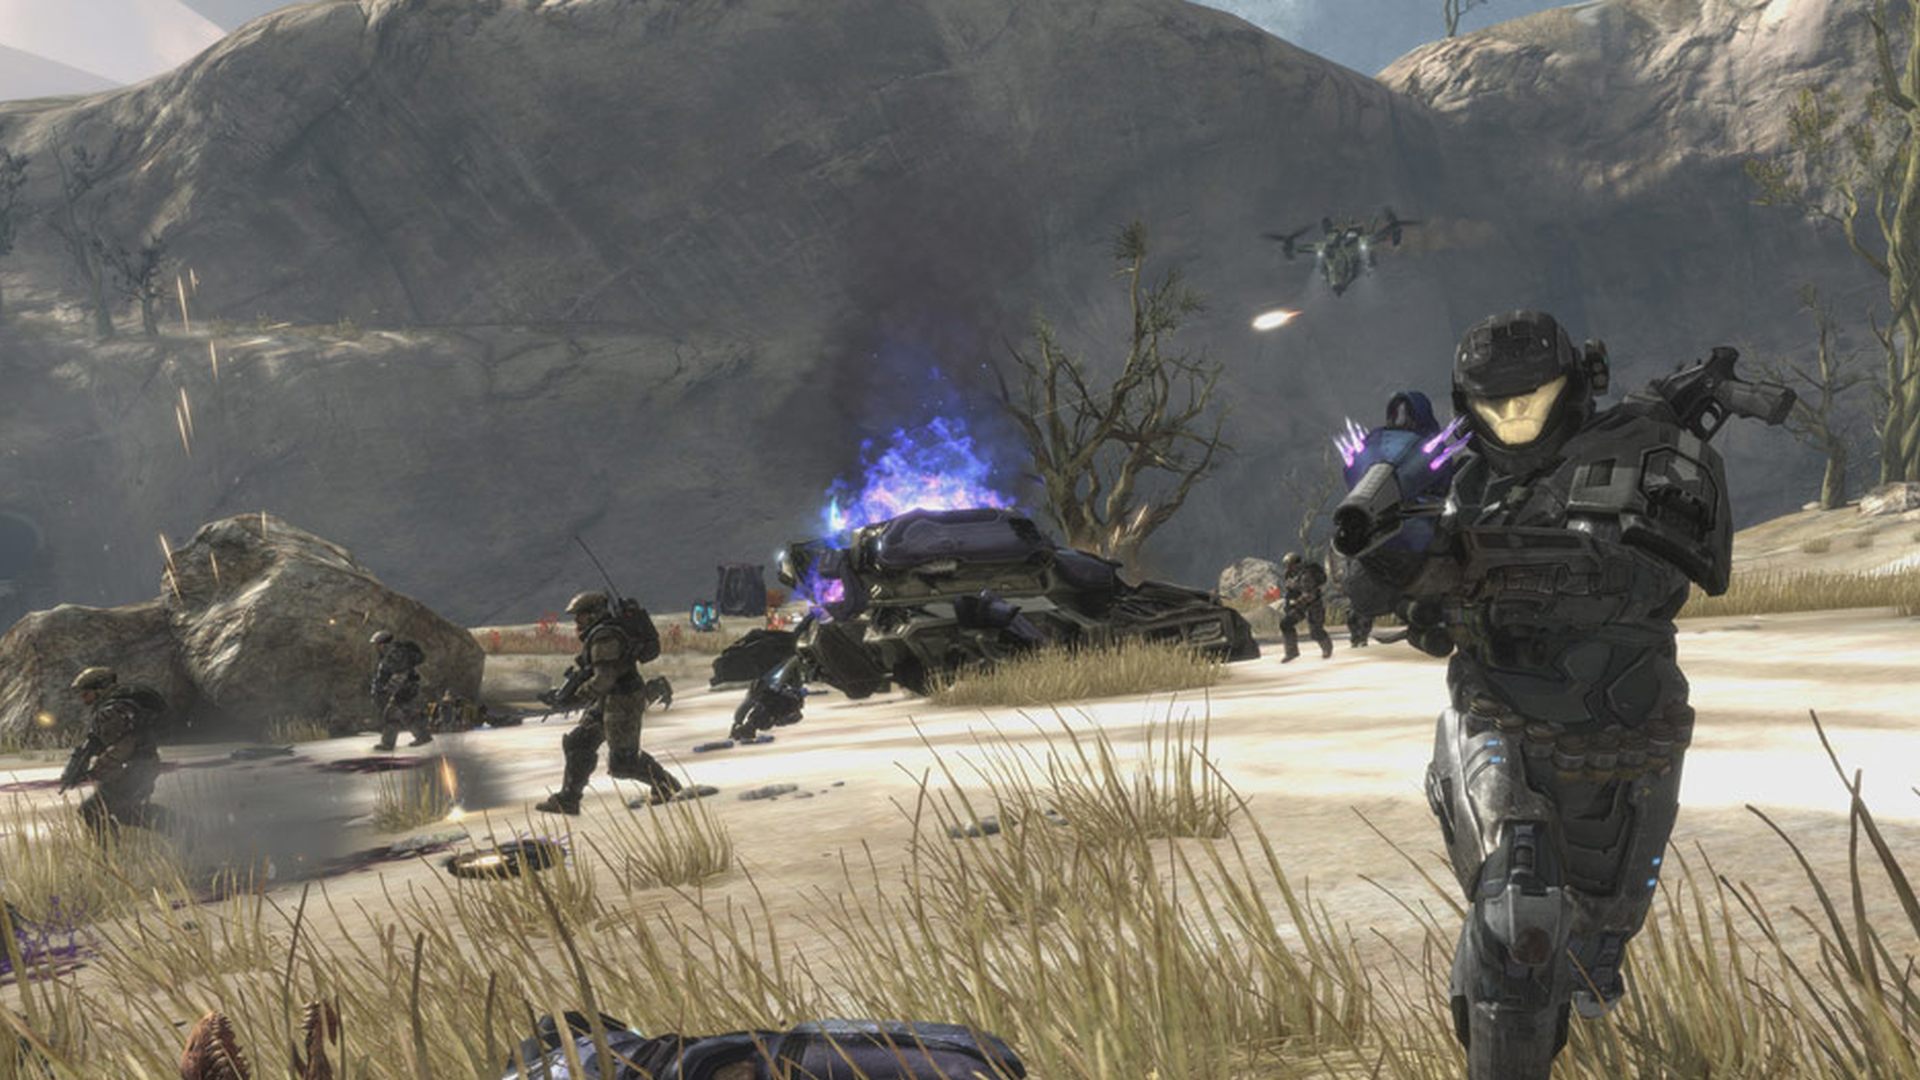 Halo Reach on PC: Everything you need to know